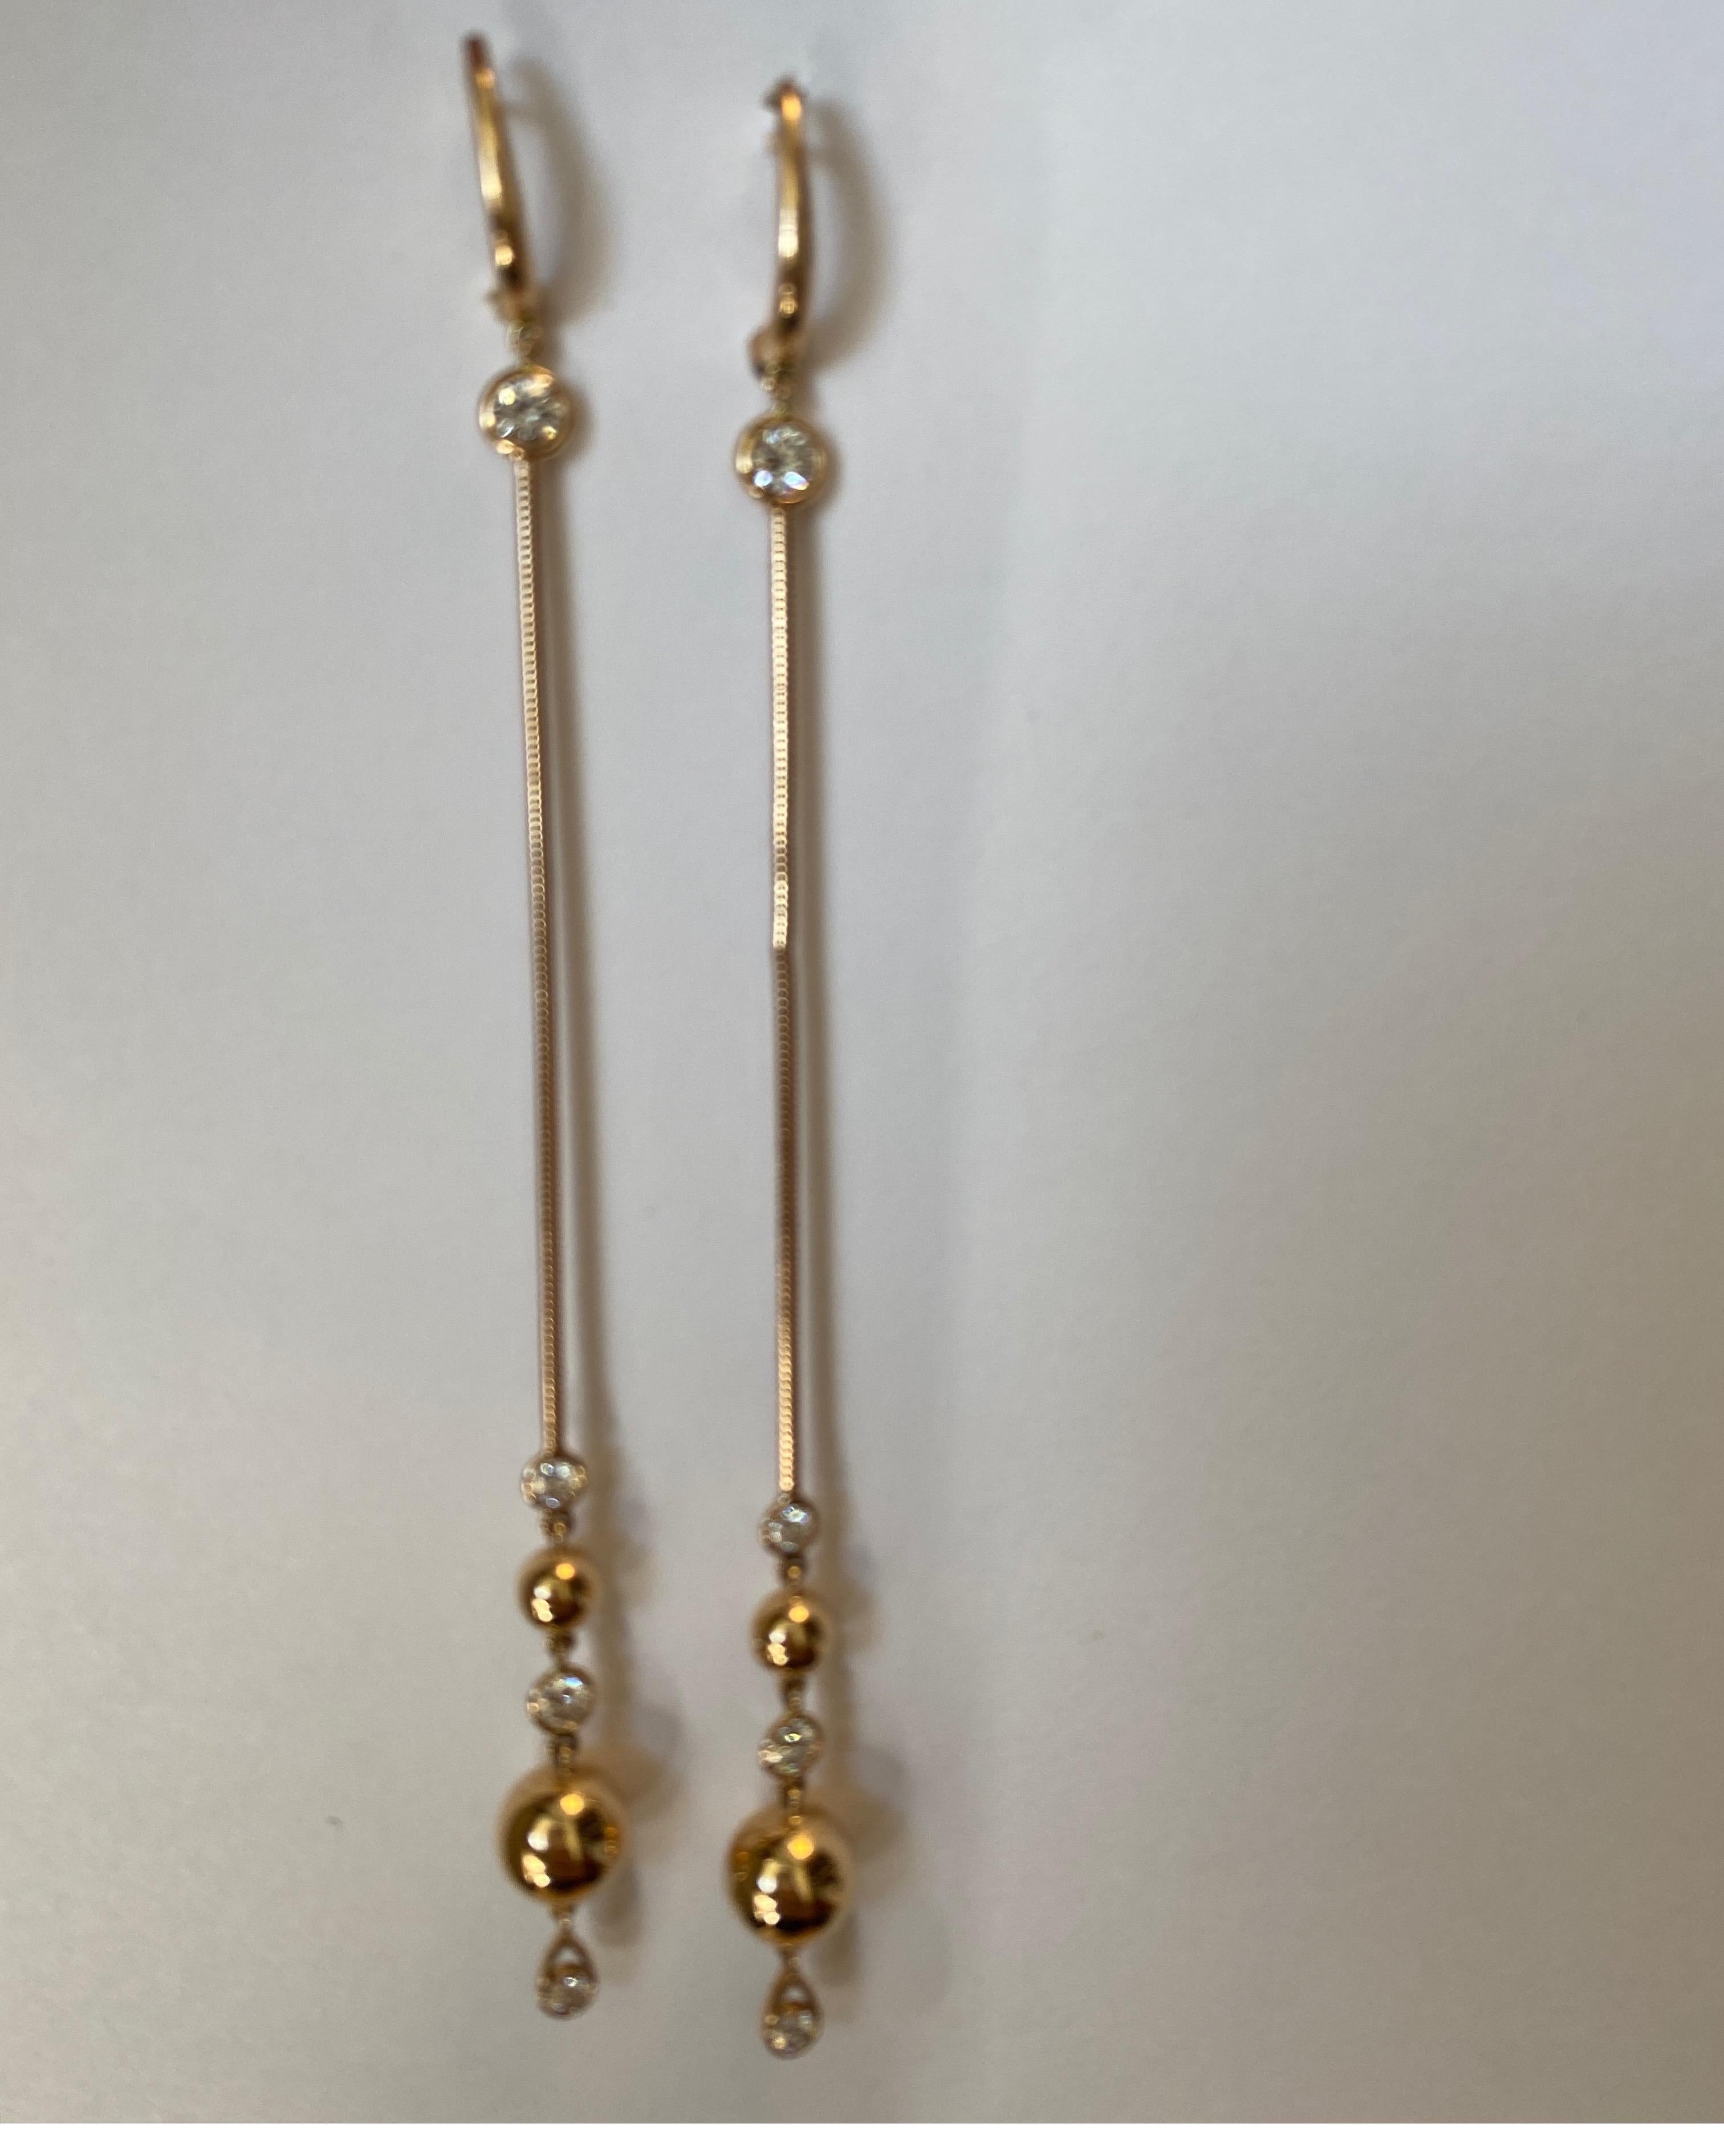 18K rose gold long drop diamond earrings set with 8 full cut round diamonds weighing .82cts, by Crivelli.
Retail $4750